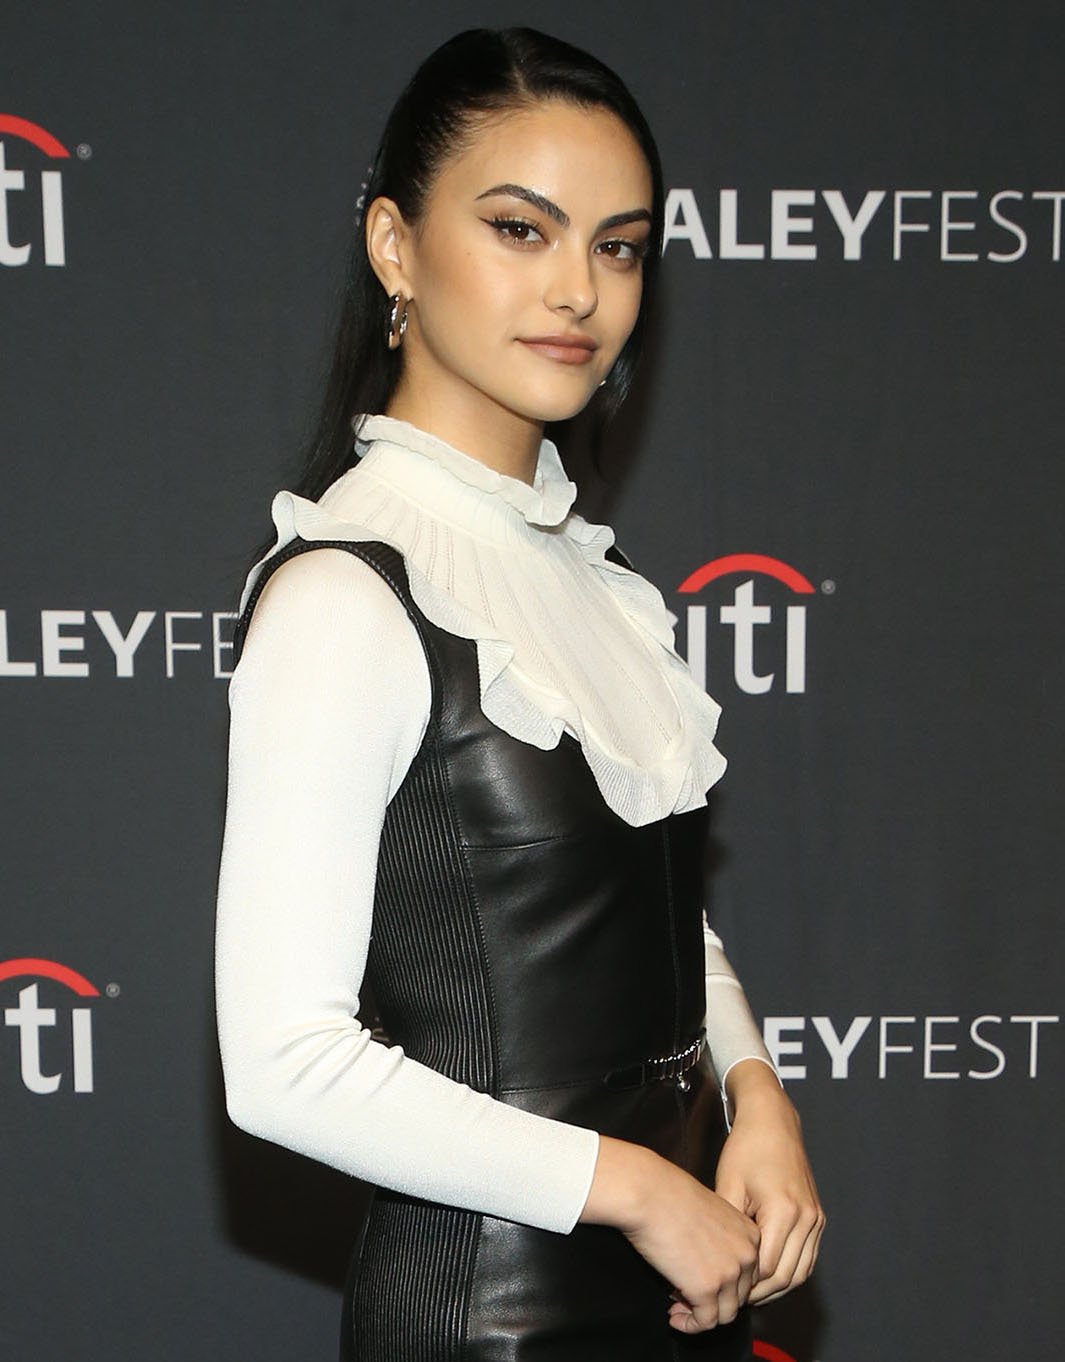 Camila Mendes styles her black hair in a half-up ponytail and wears winged eyeliner with nude eyeshadow and lipstick